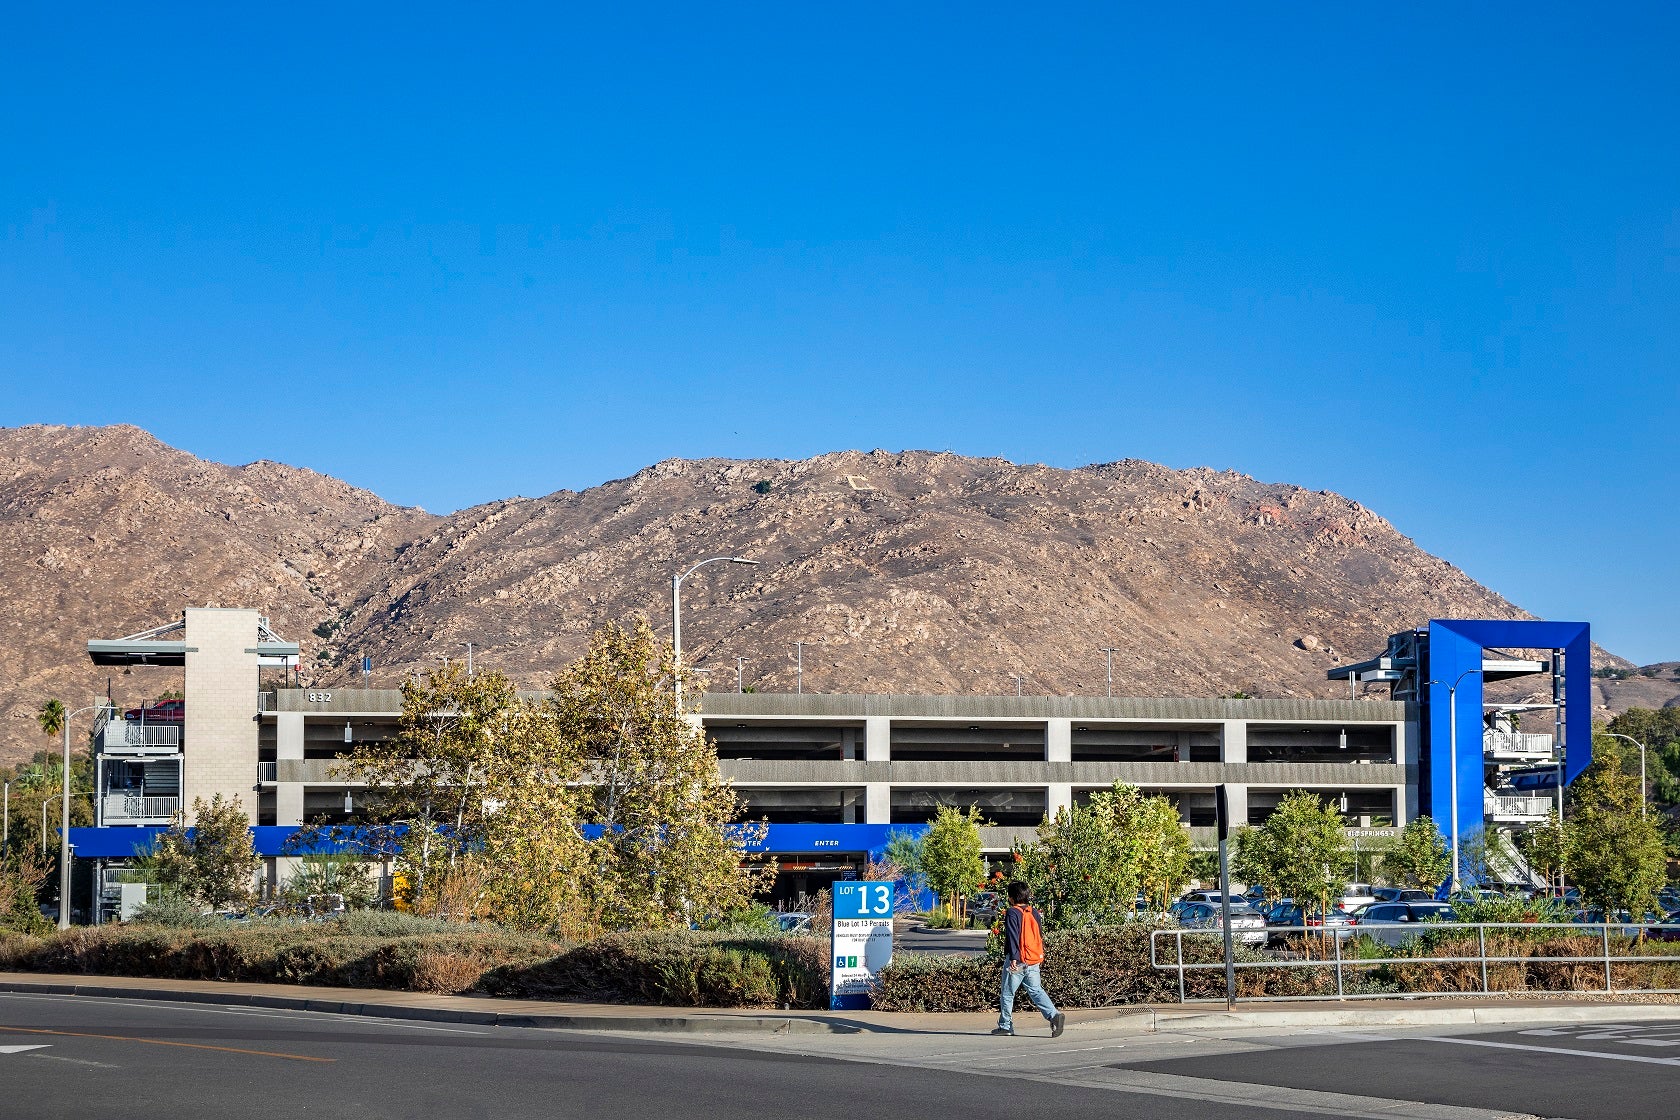 Distant view of parking structure